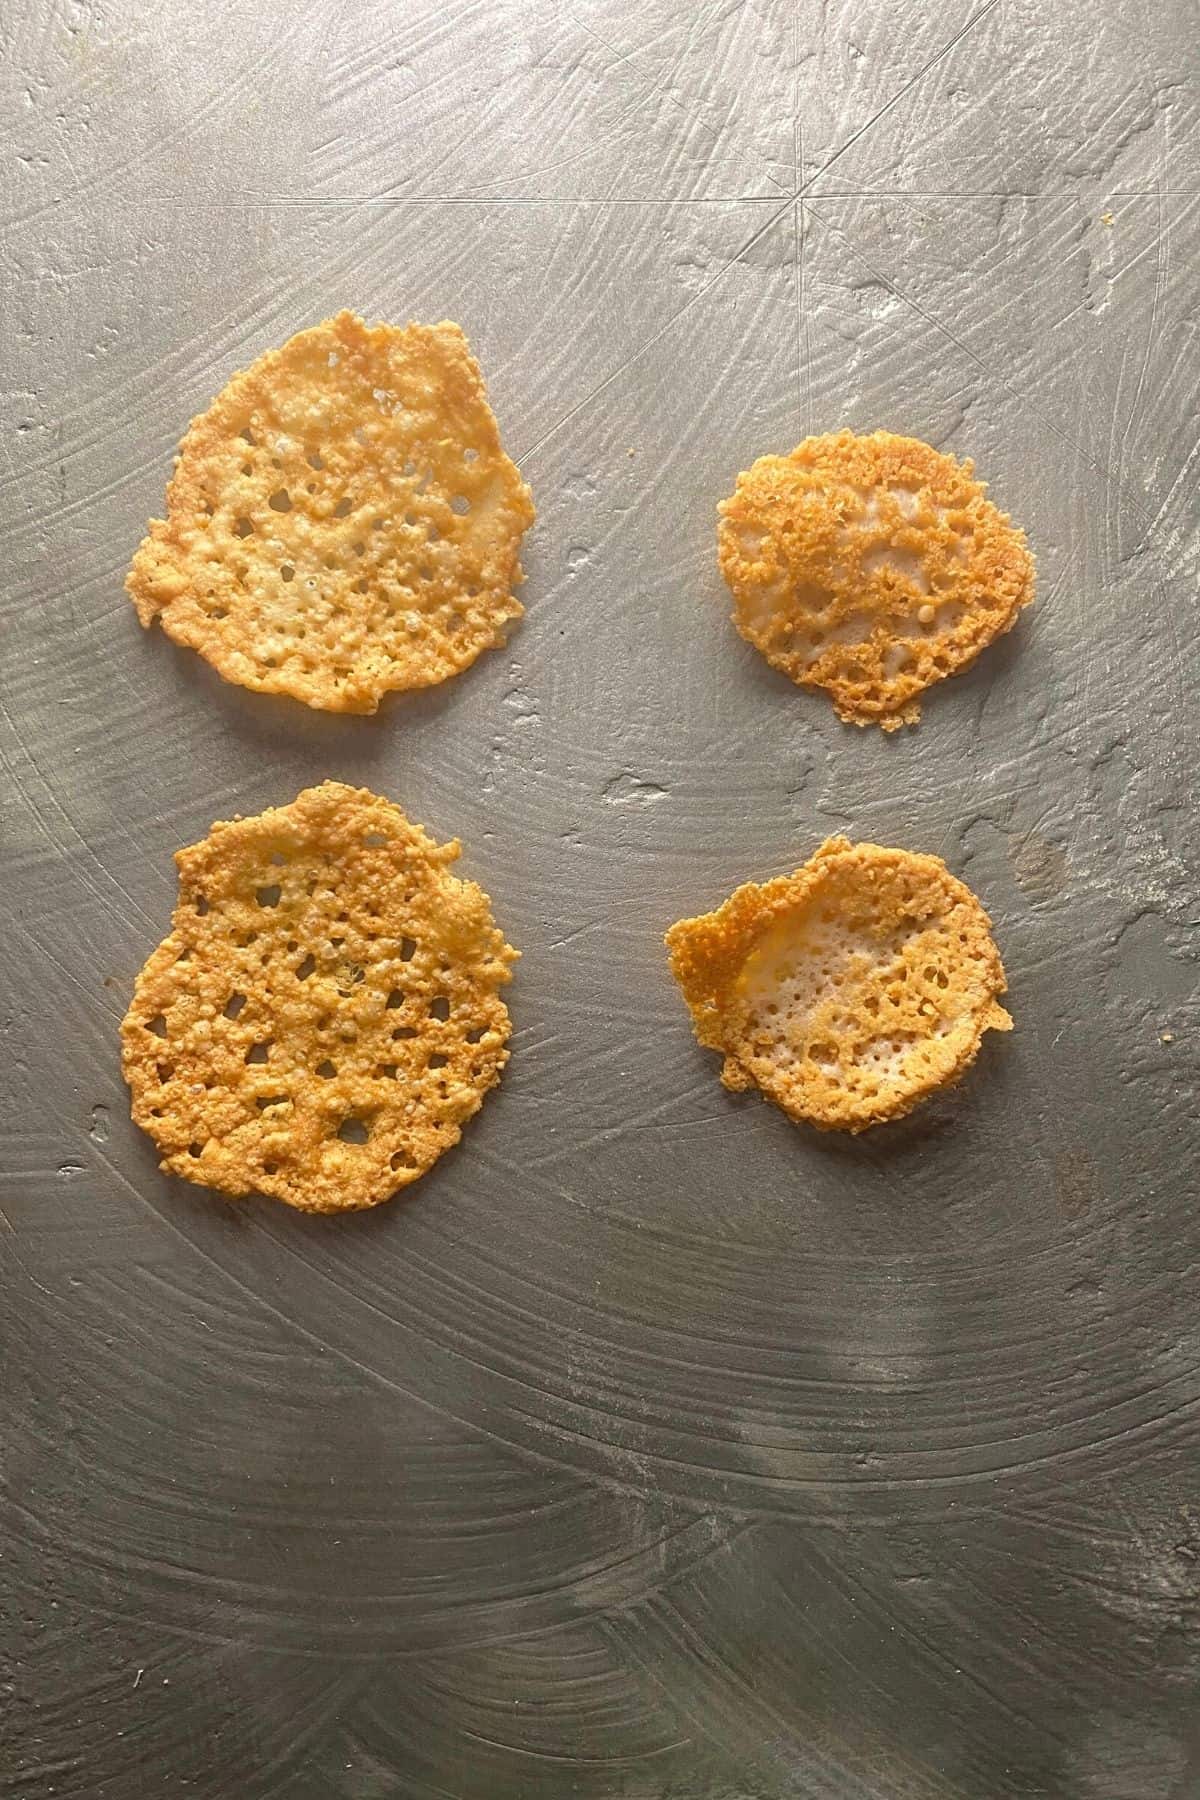 A comparison of the size of parmesan crisps made in the oven vs. pan fried